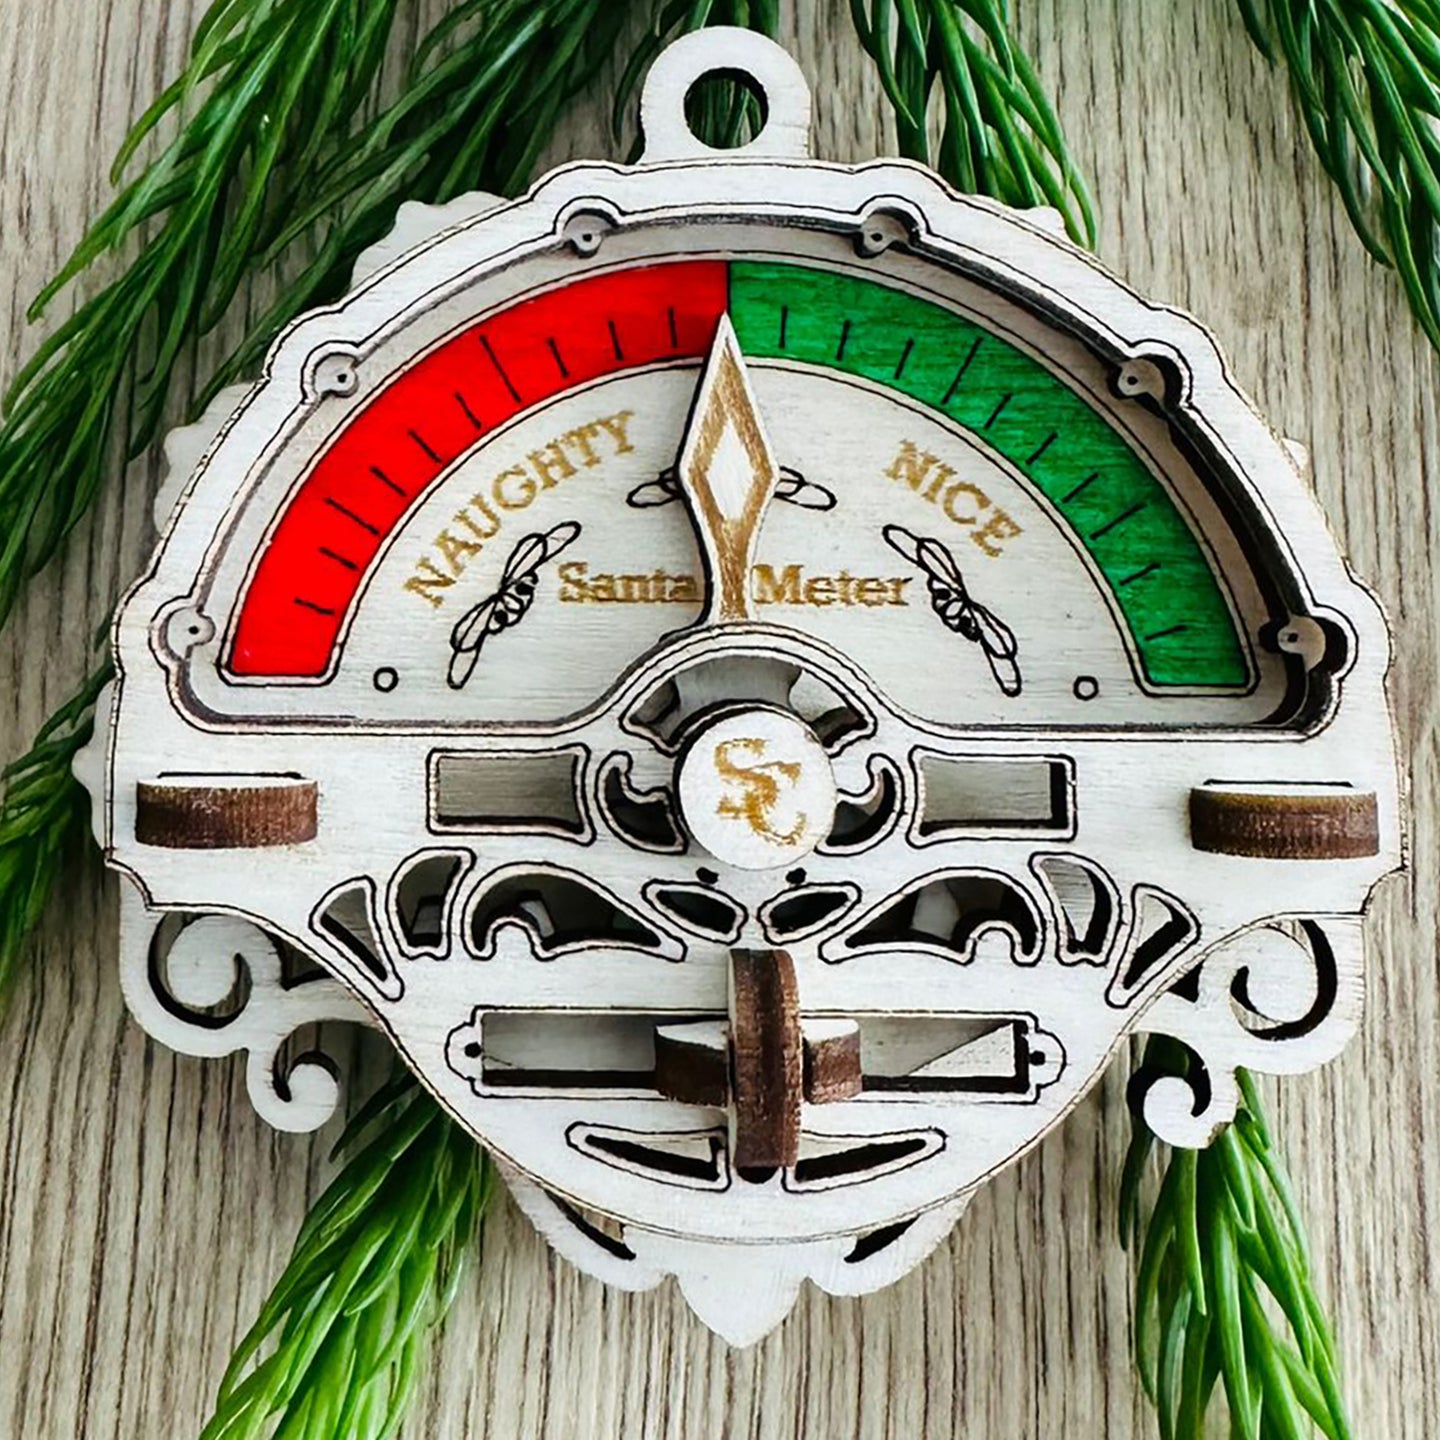 Laser Cut Santa Meter Ornament - Festive Holiday Decor with Naughty or Nice Scale